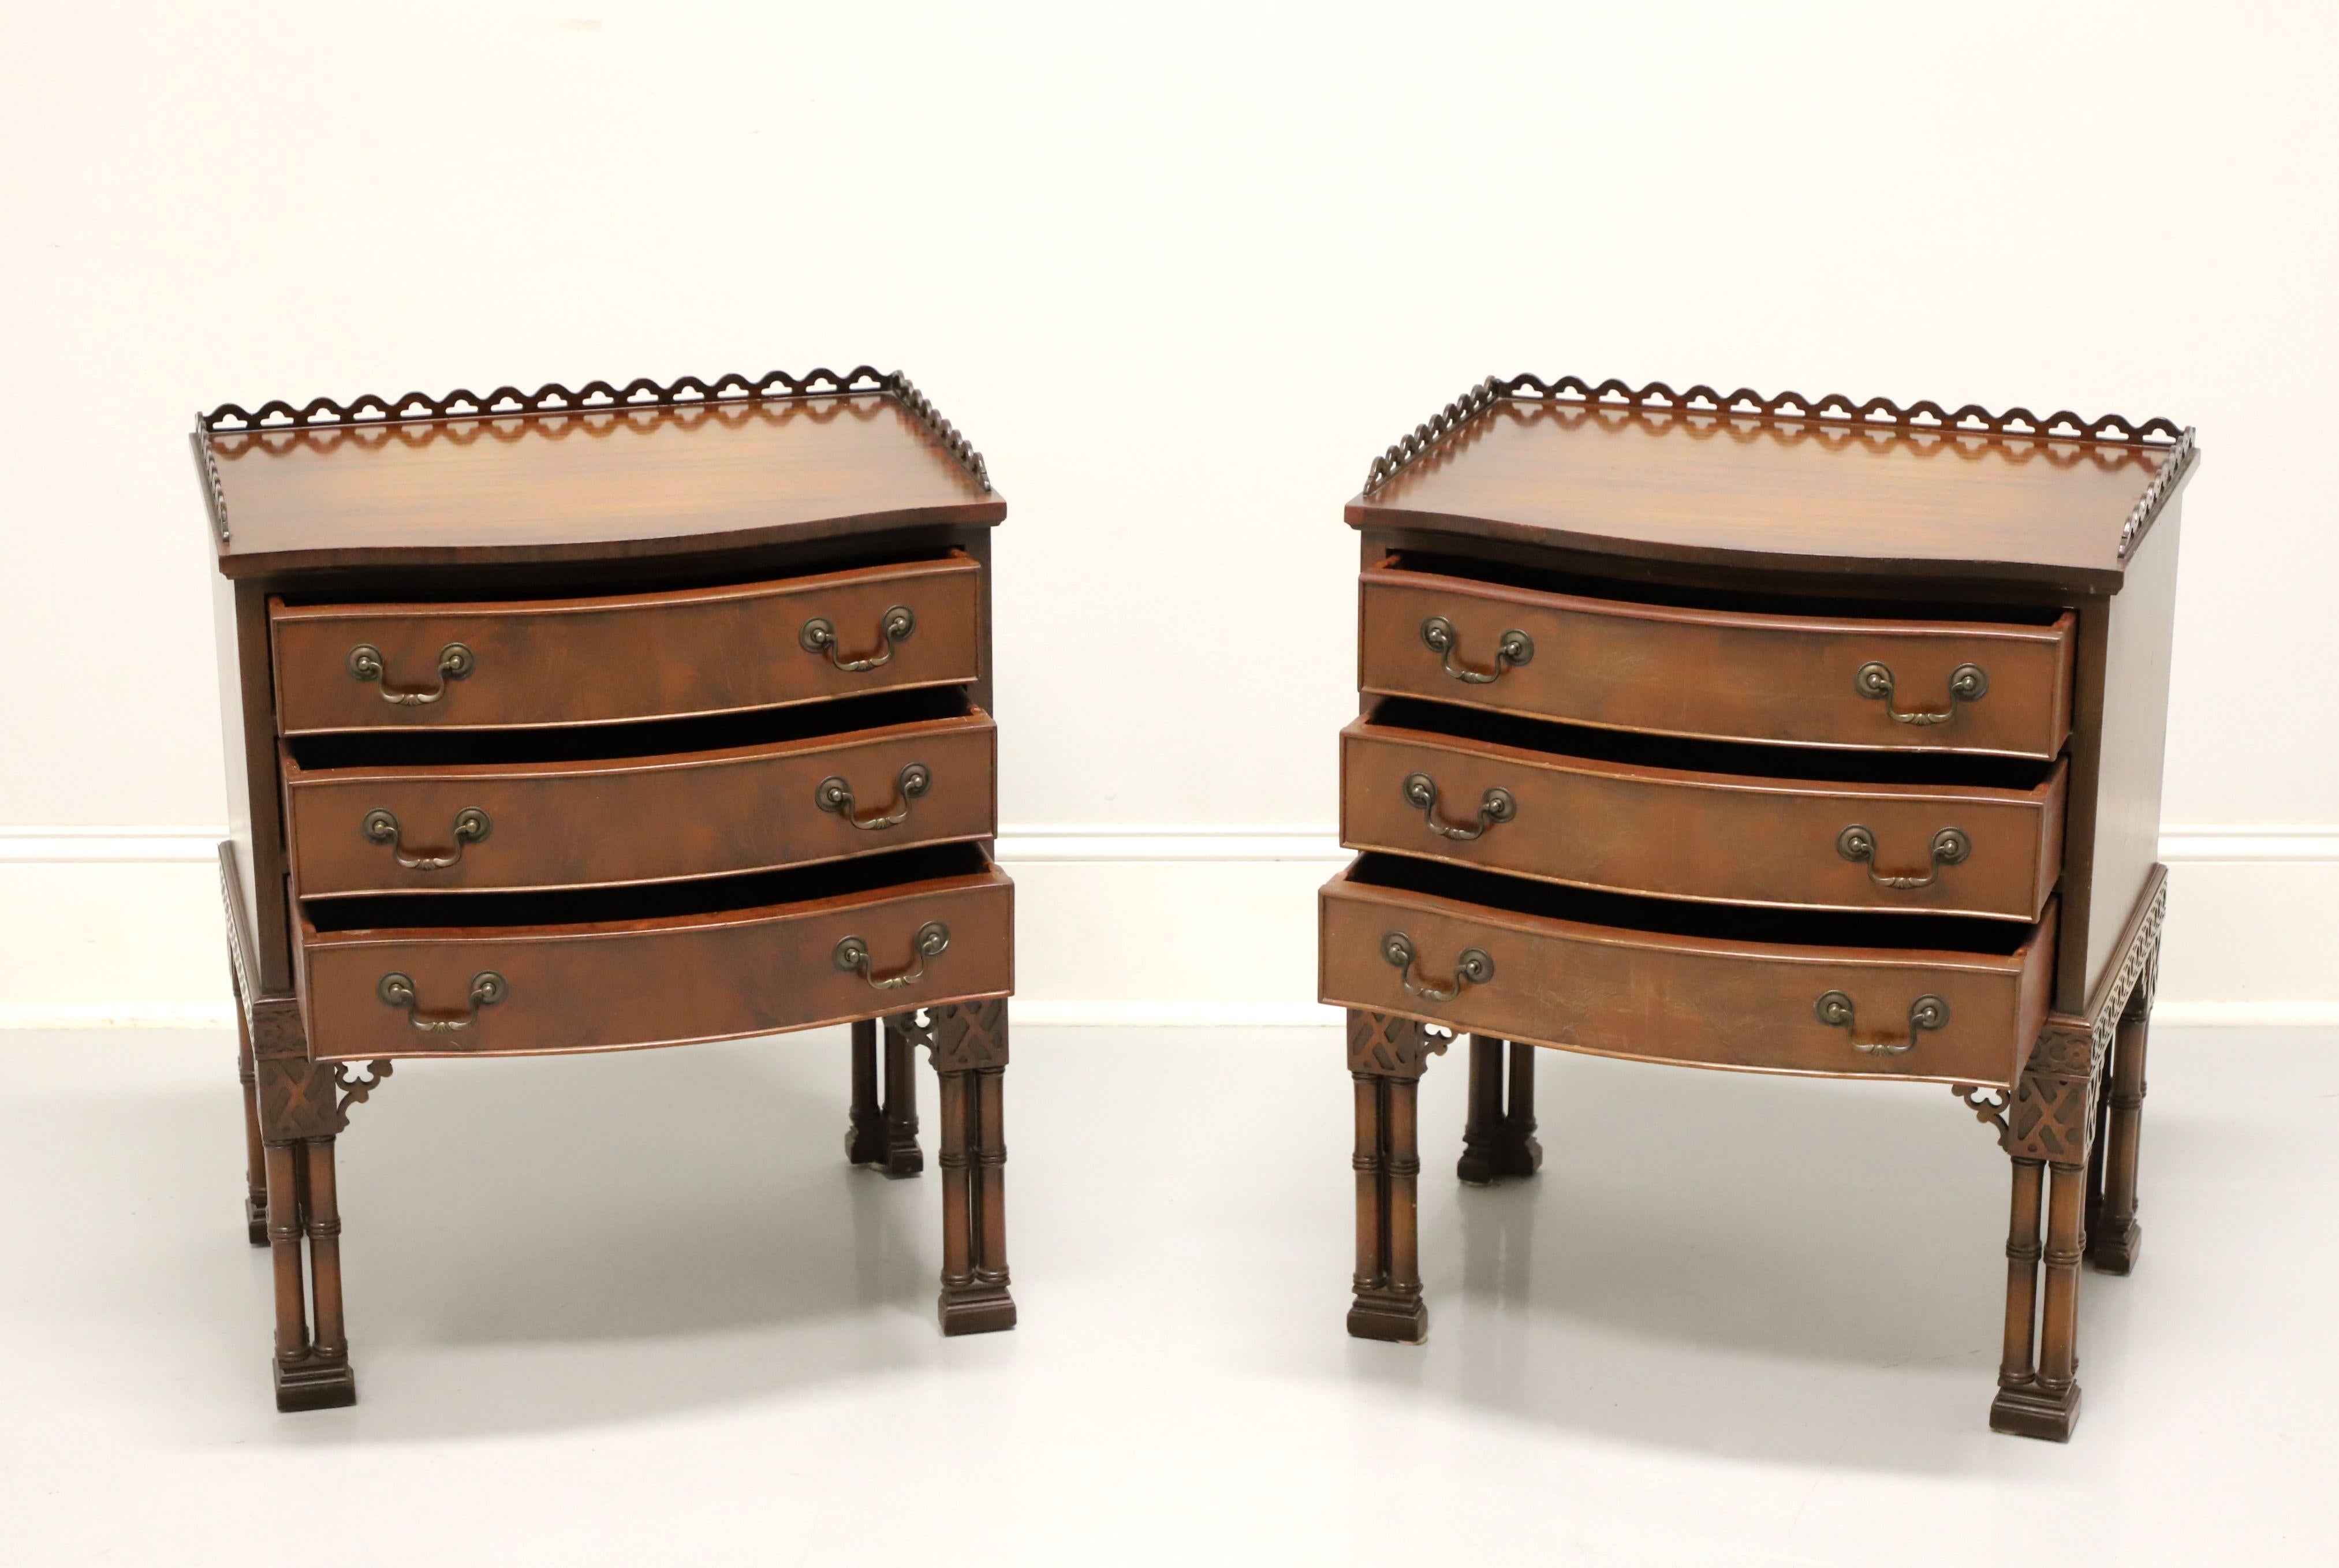 20th Century WARSAW MFG Mahogany Chinese Chippendale Nightstands / Bedside Chests - Pair